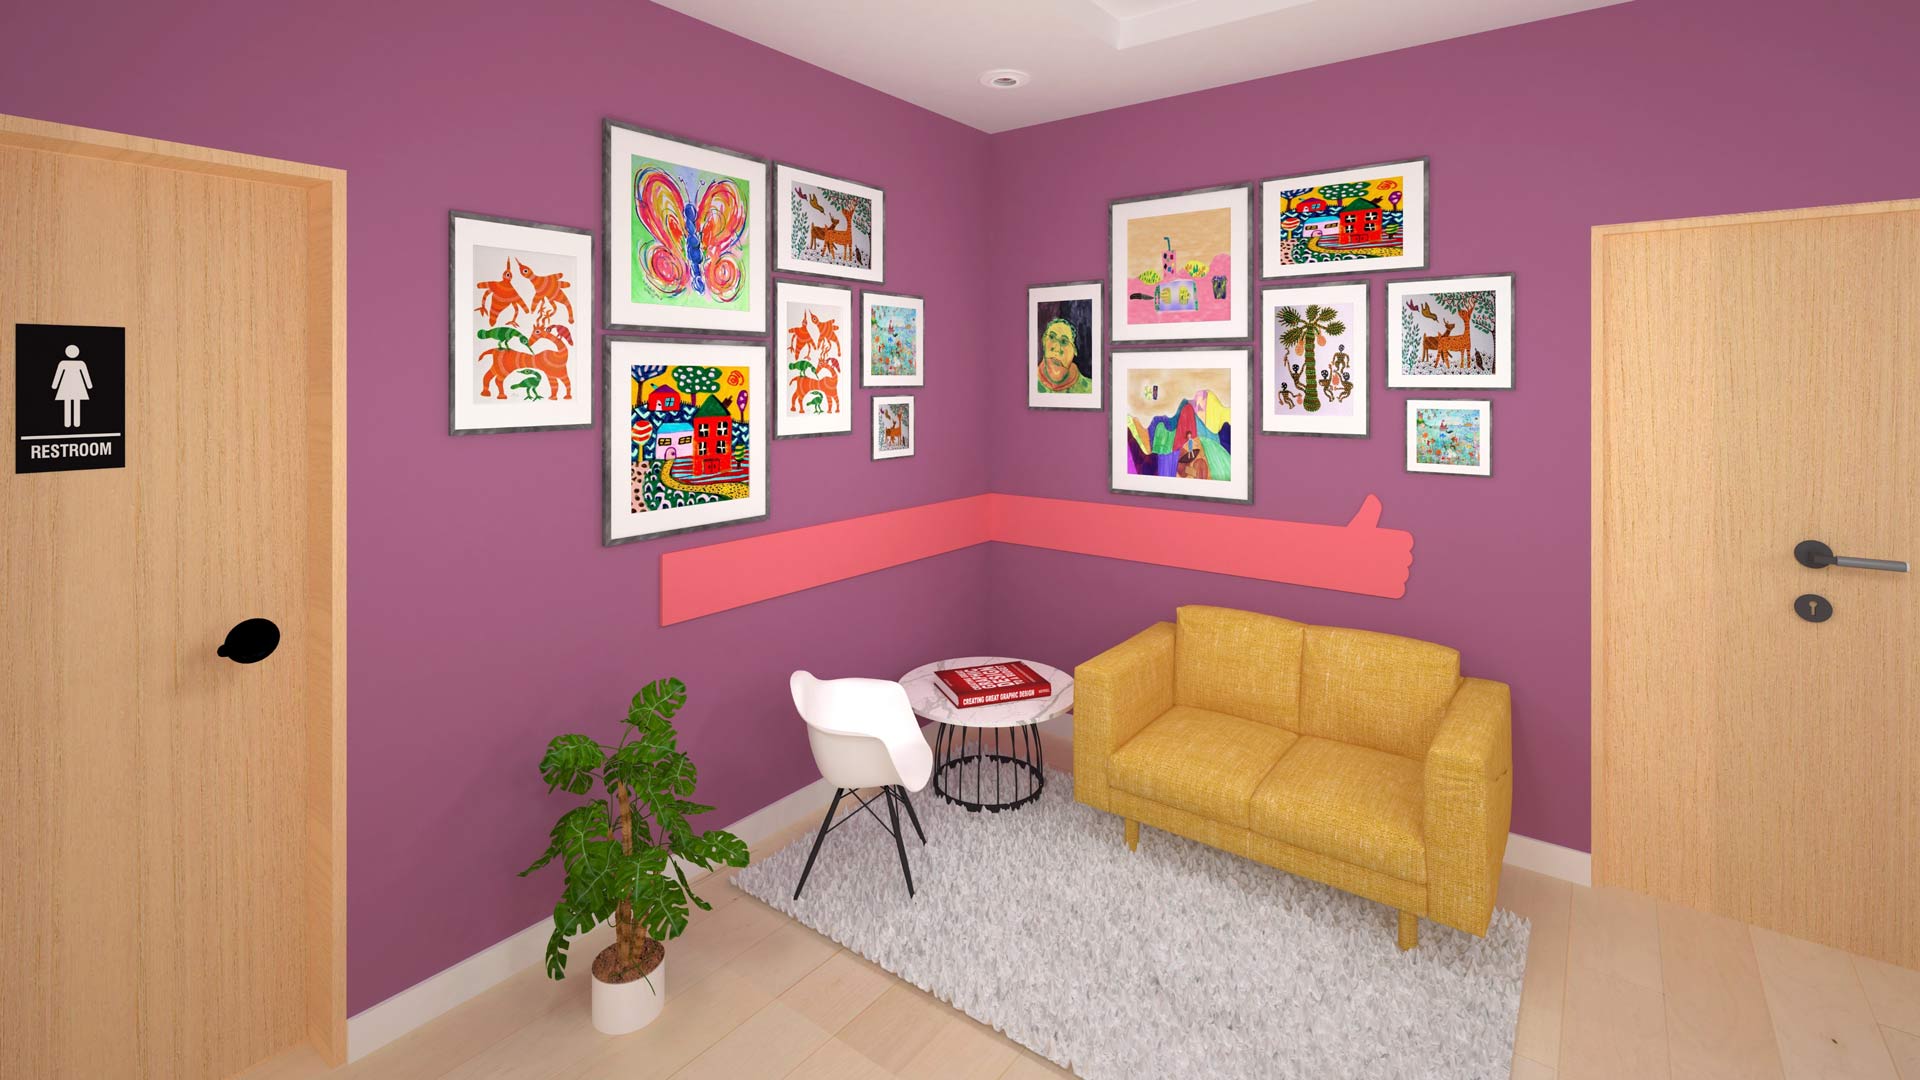 Kala space design; corner lounge with couch, chair and art on wall